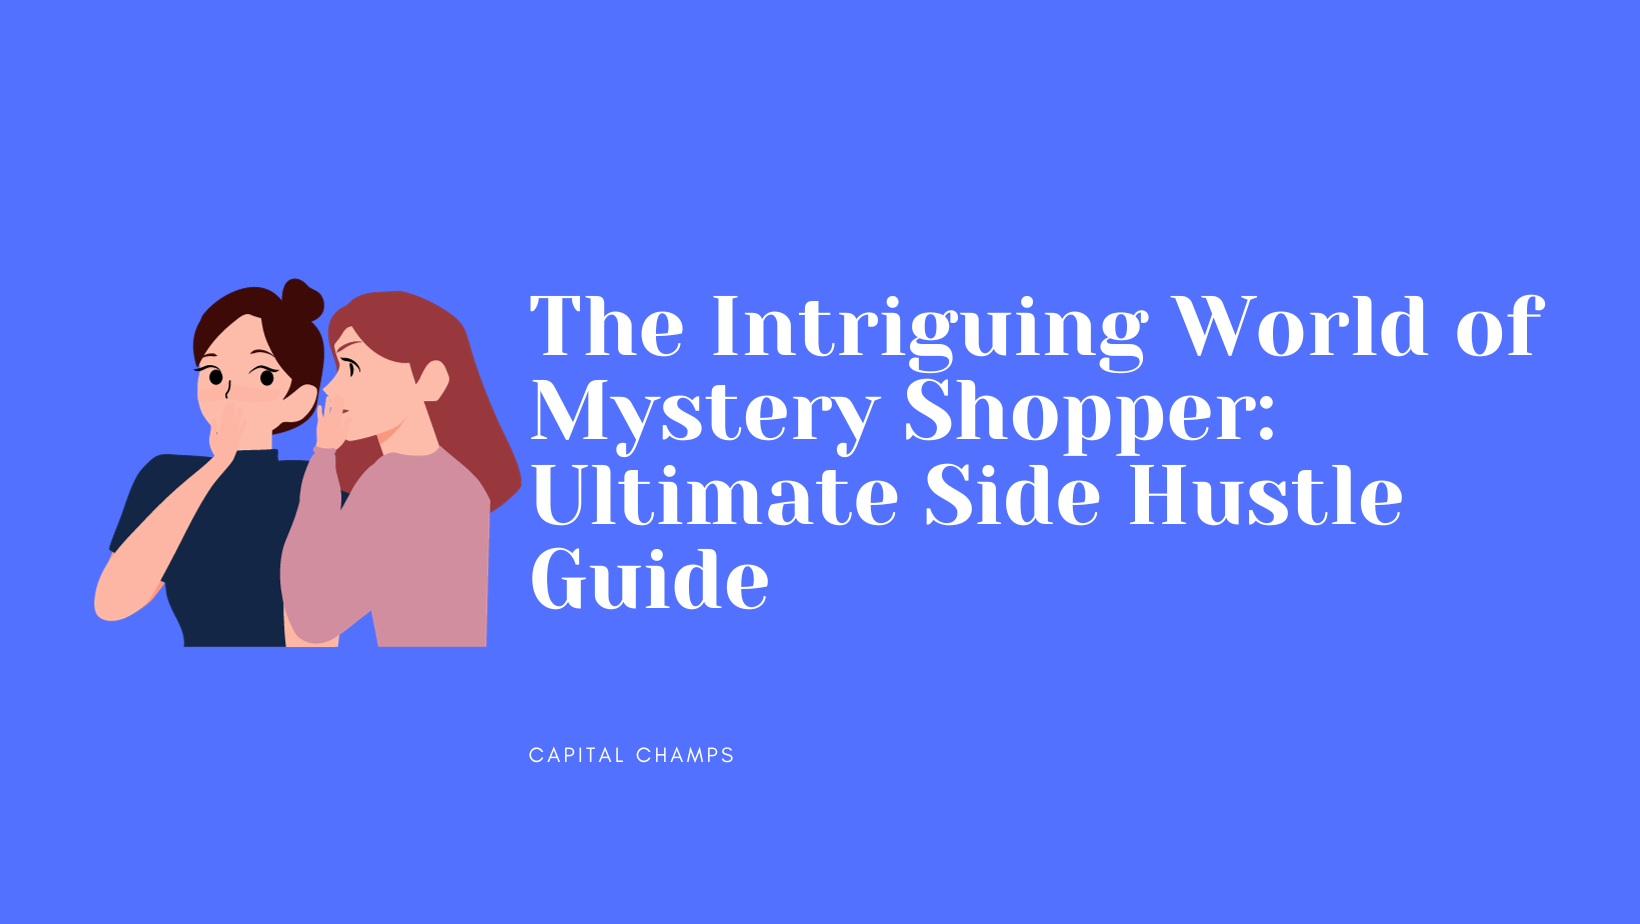 The Intriguing World of Mystery Shopper Ultimate Side Hustle Guide